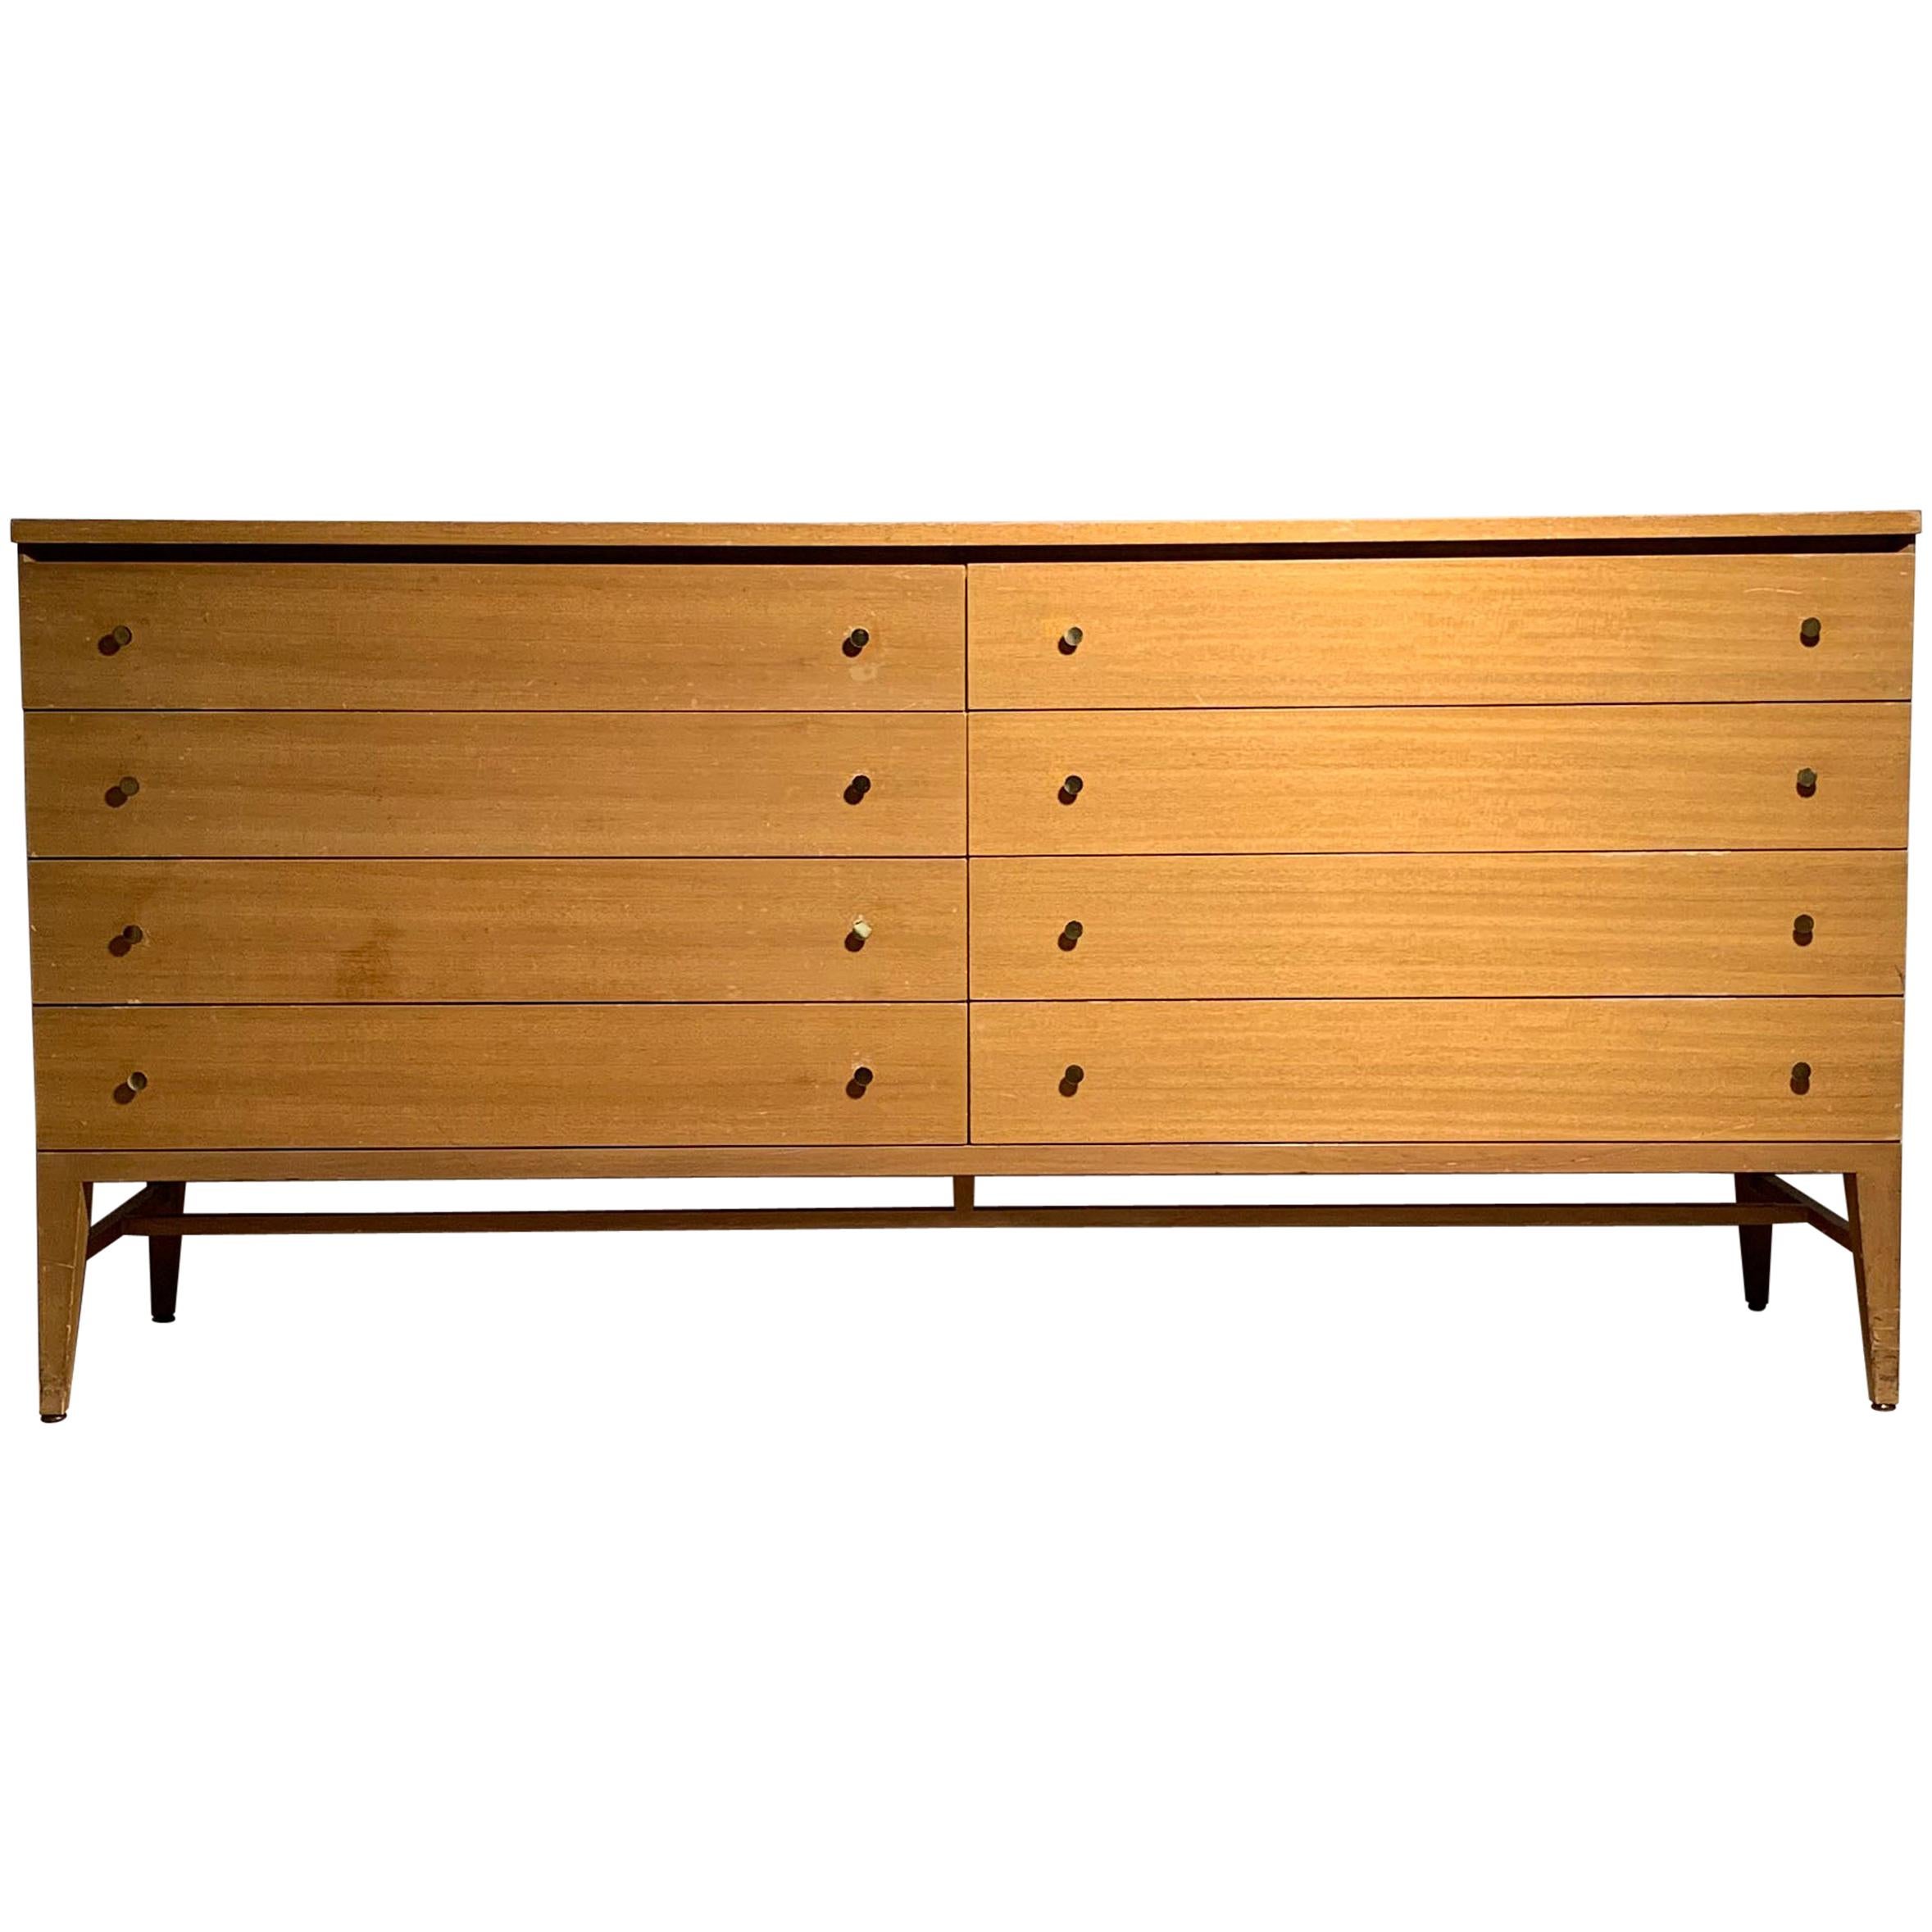 Paul Mccobb Dresser or Sideboard for Calvin The Irwin Collection